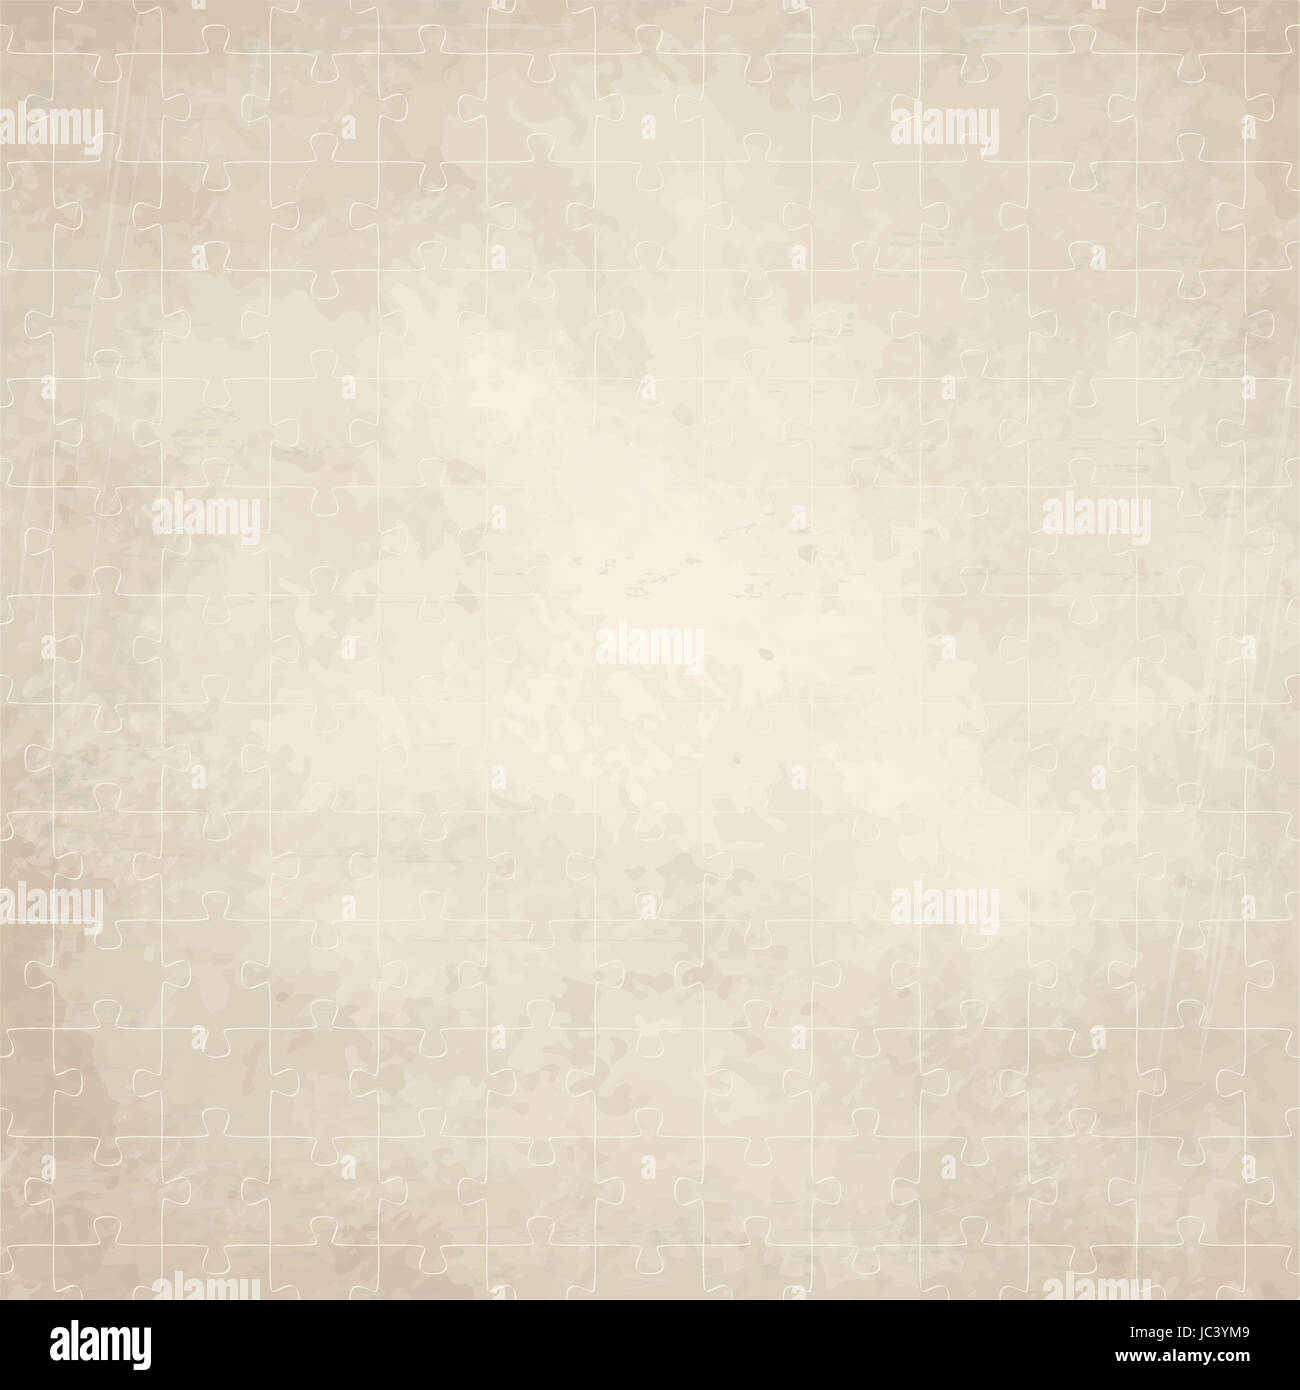 vector of old vintage paper background with puzzle Stock Photo